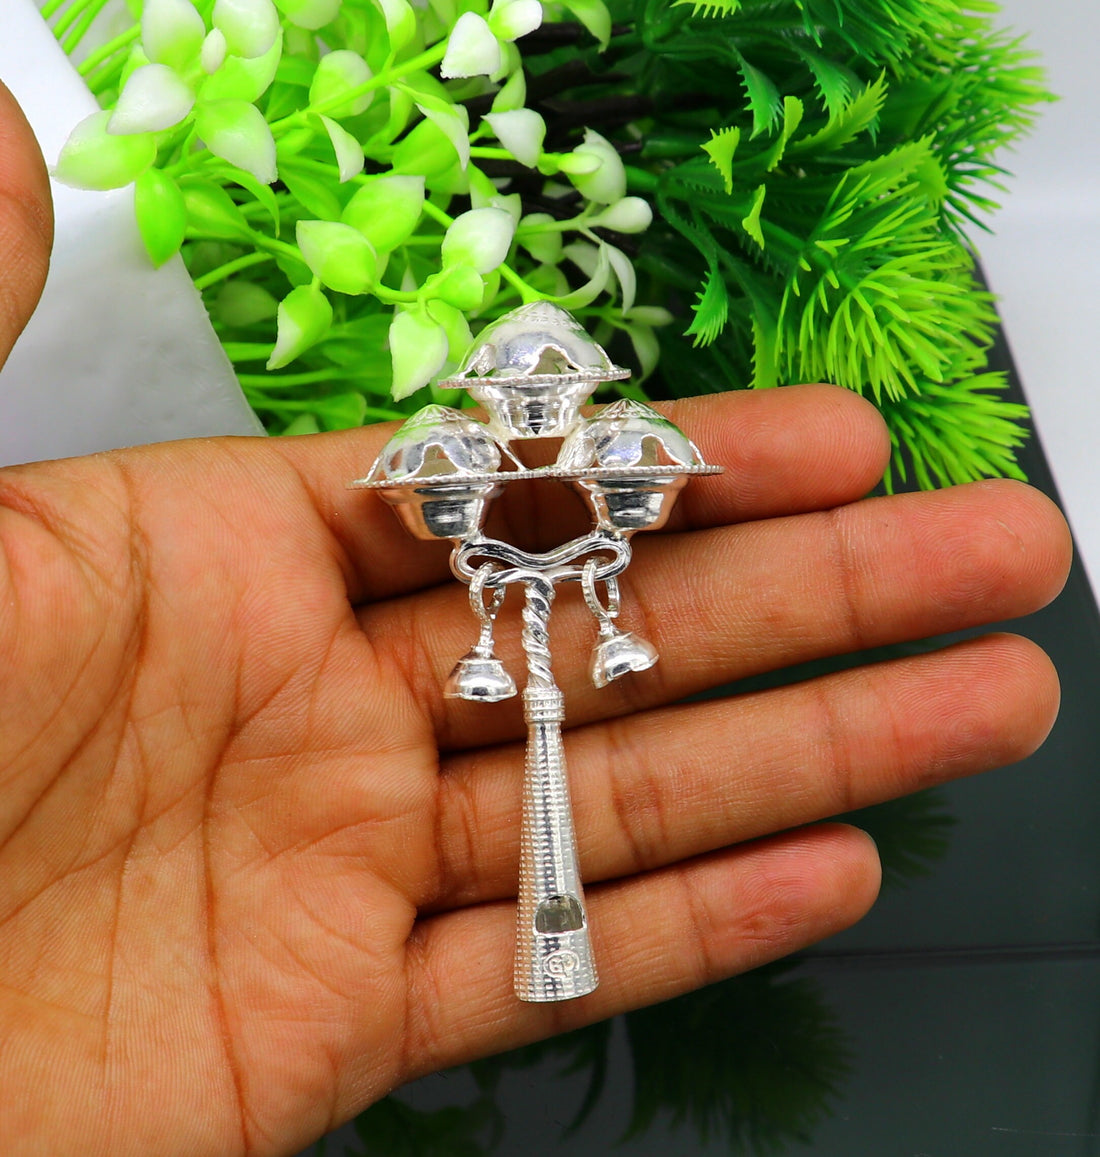 Vintage antique style handmade design new born baby gifting bells toy, baby krishna gifting toy, silver whistle, silver article su191 - TRIBAL ORNAMENTS